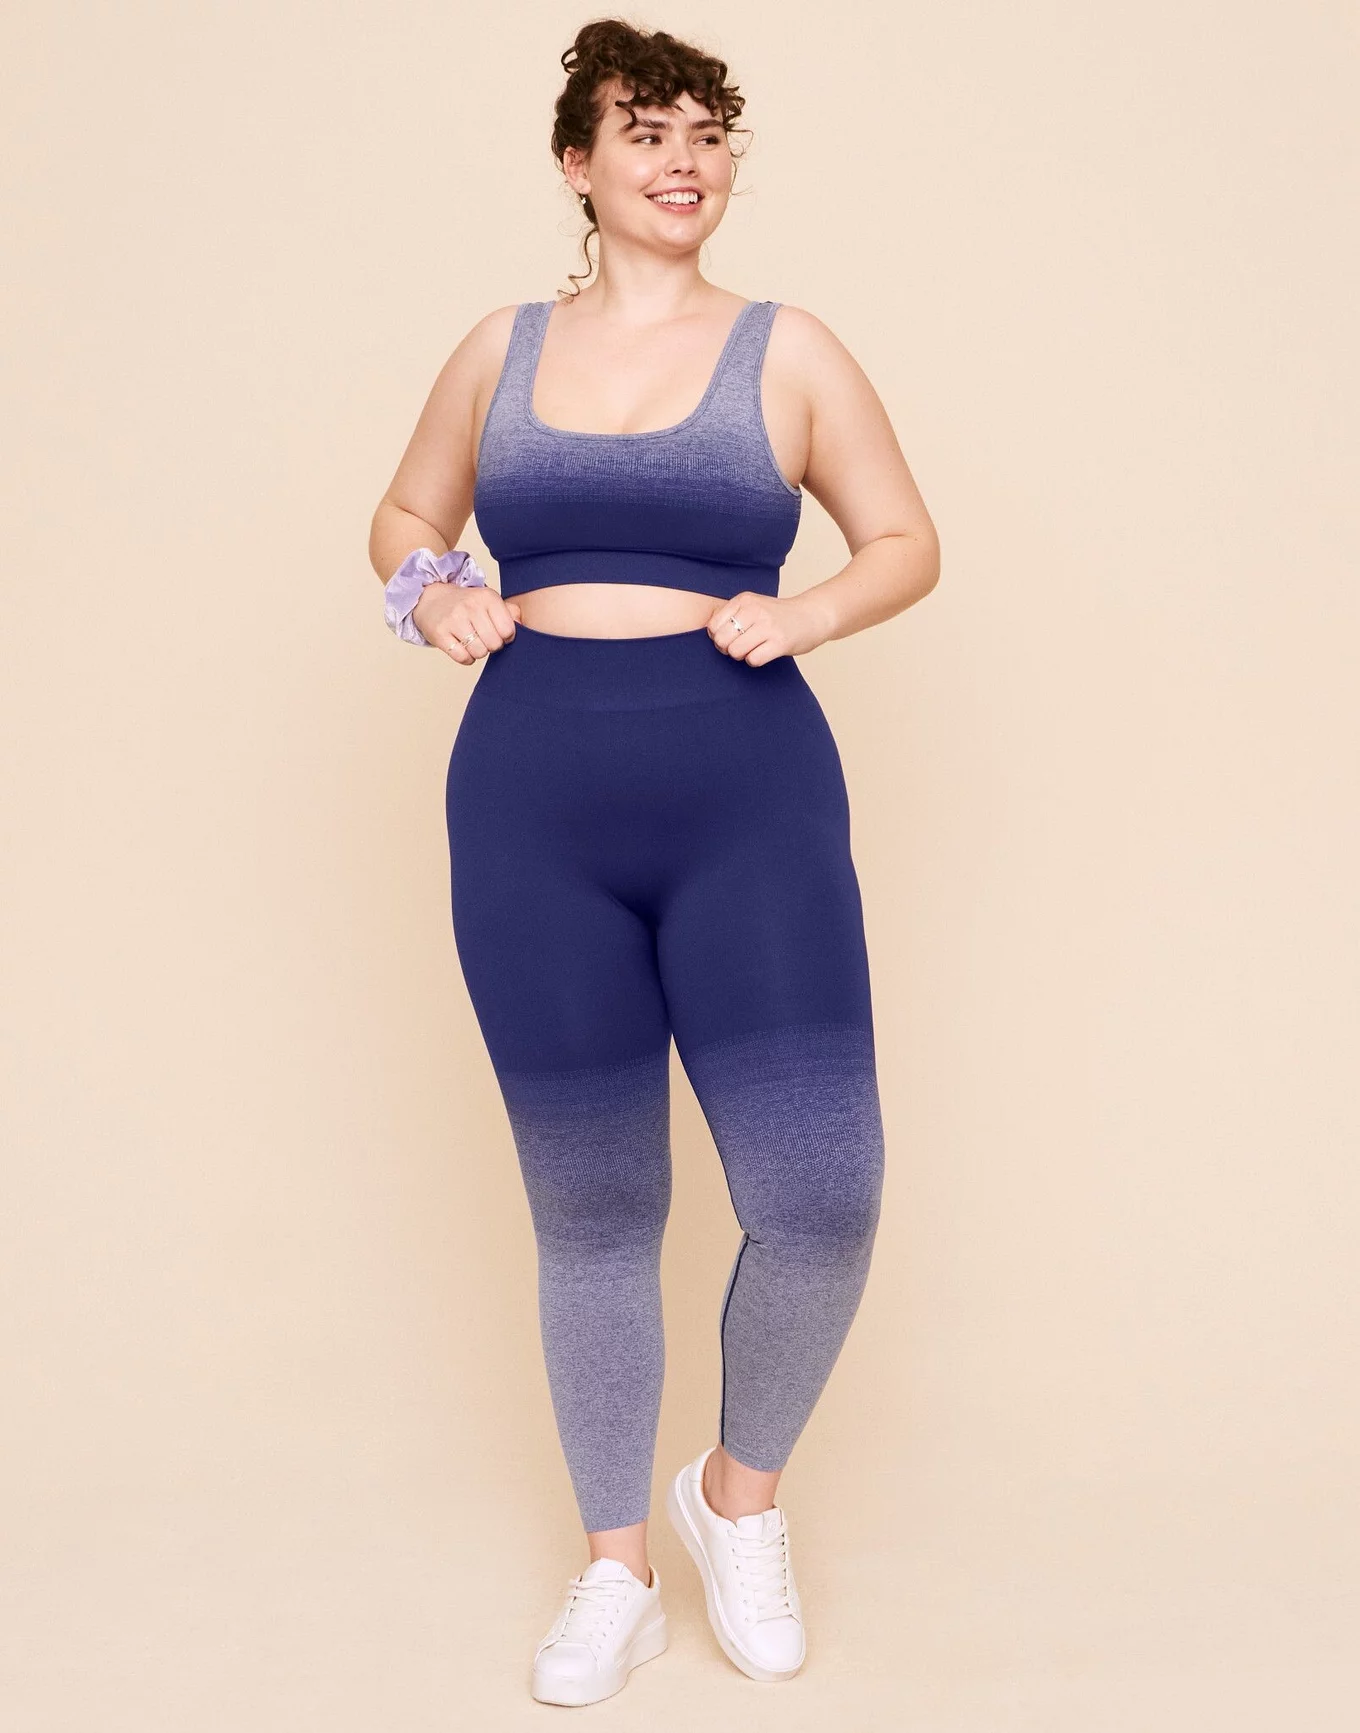 Shopee - Win a set of ombre sports bra and tights from